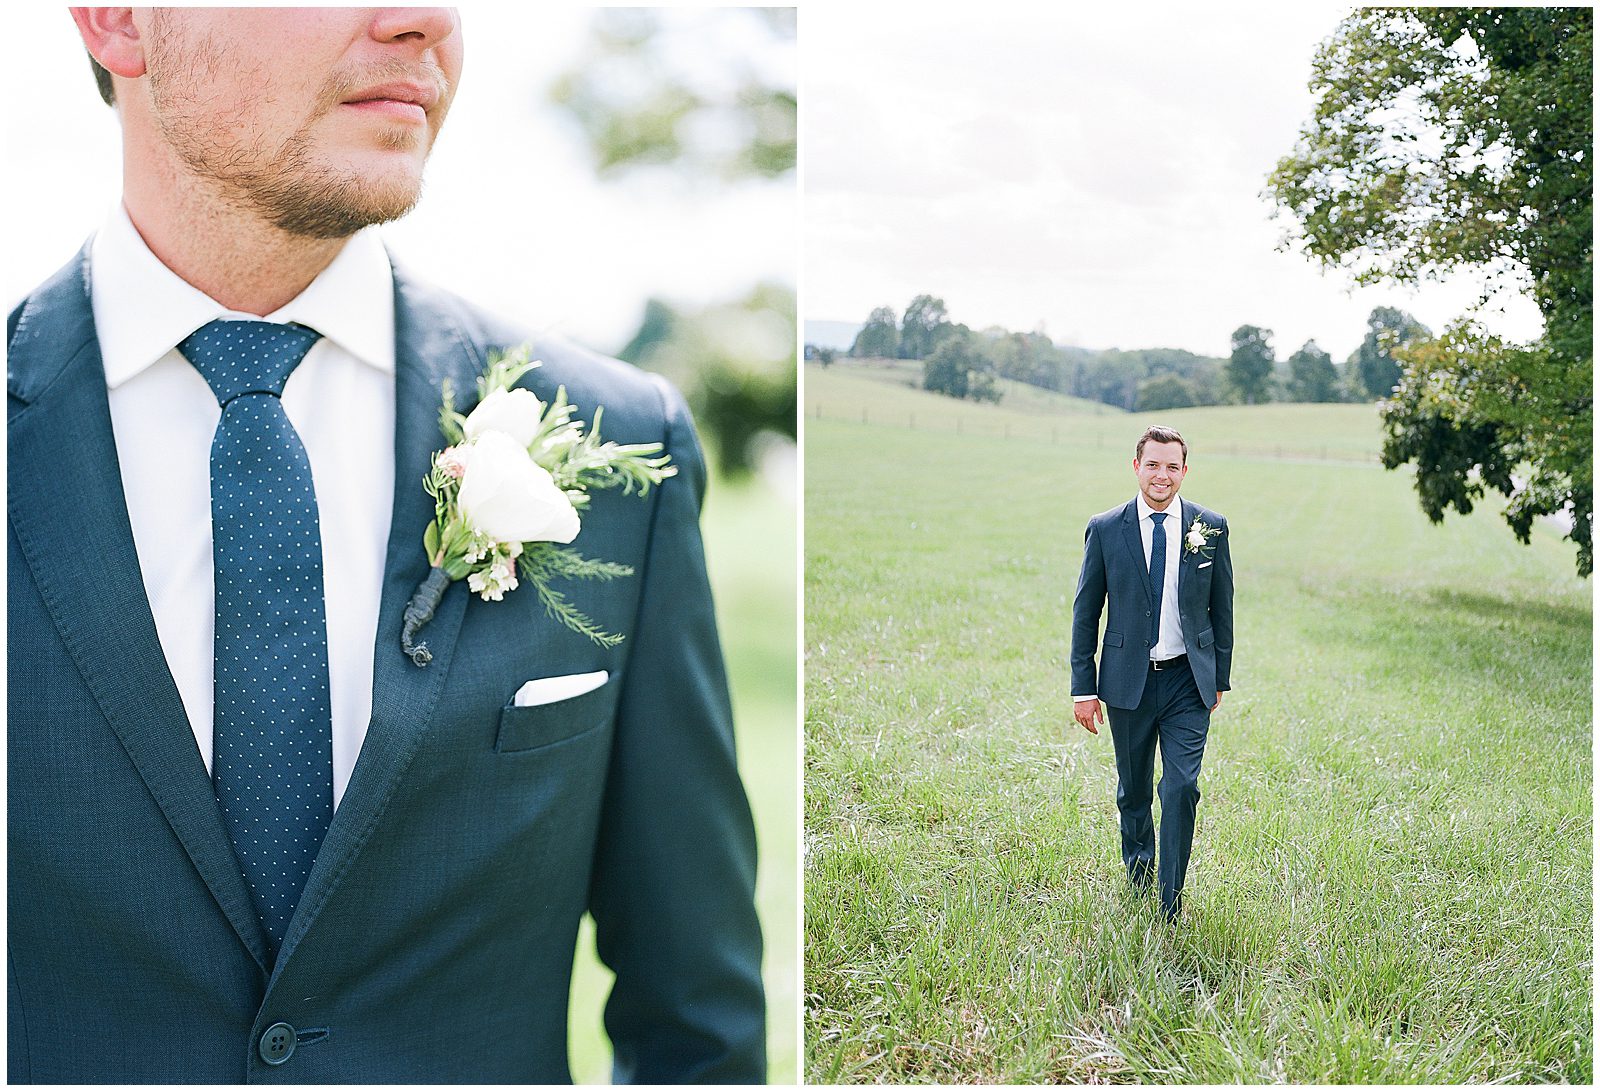 Groom's Boutonnière and Groom Walking Through Field Photos